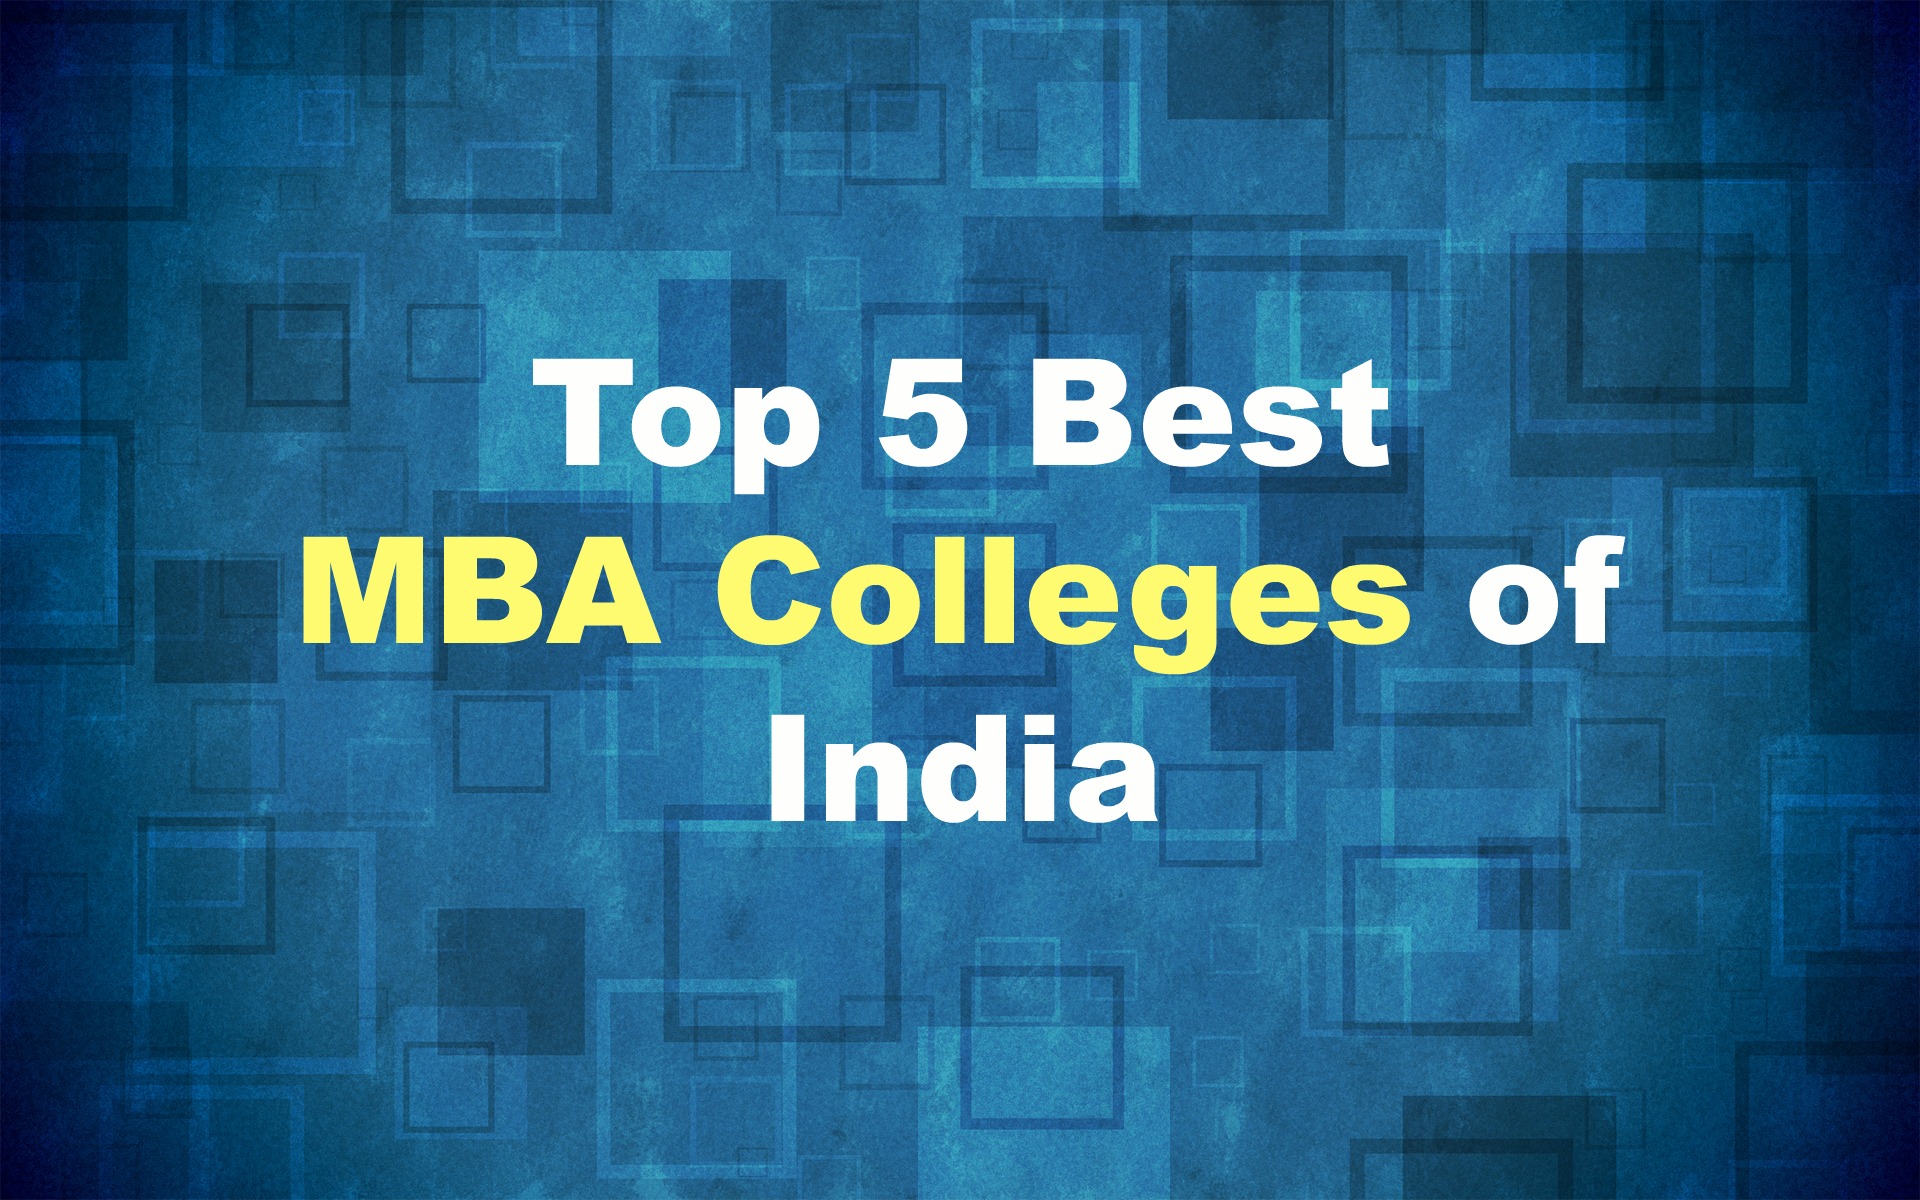 List of Top 5 Best MBA Colleges of India